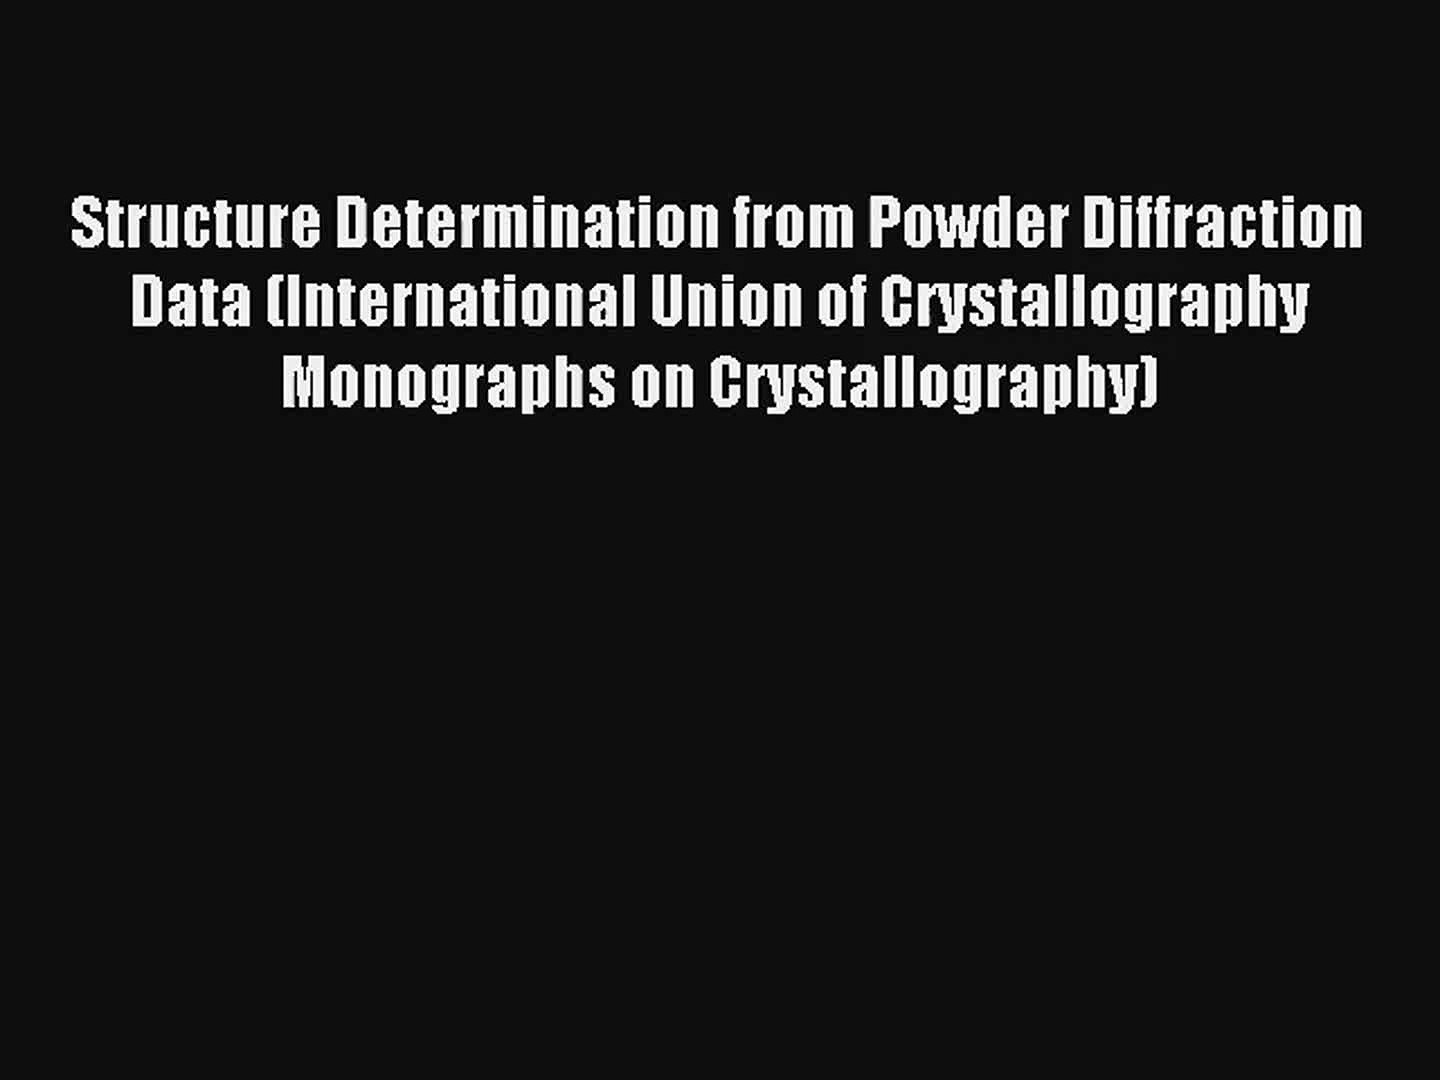 Read Structure Determination from Powder Diffraction Data (International Union of Crystallography